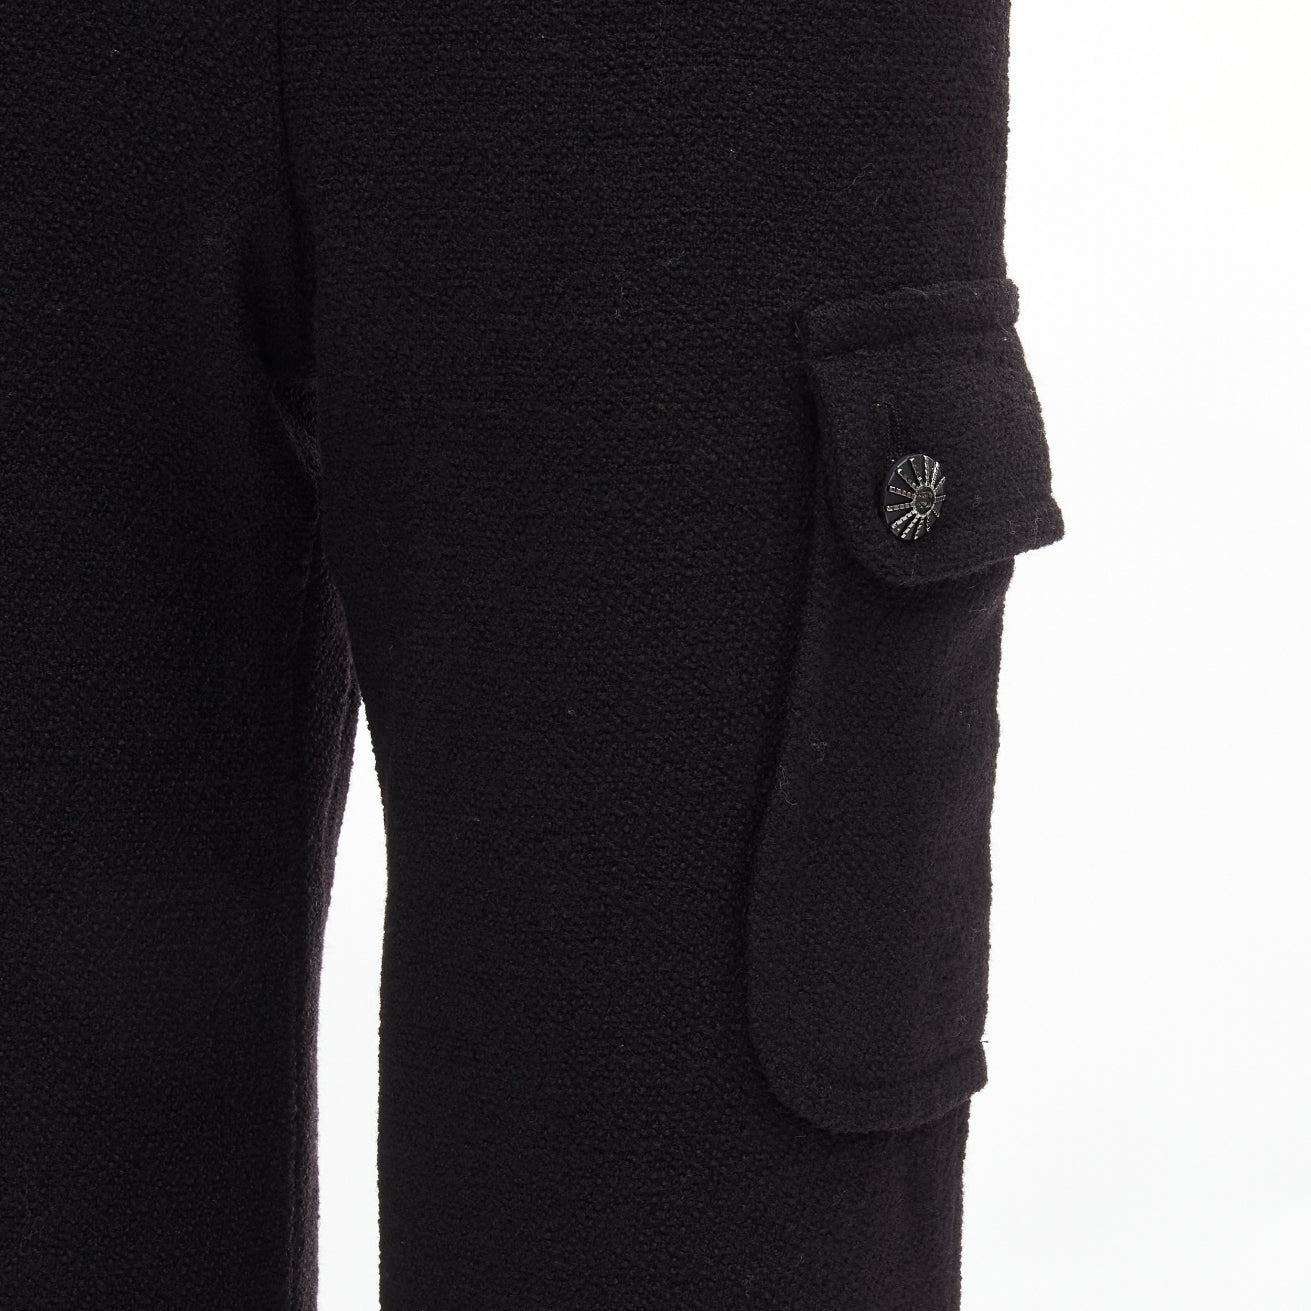 CHANEL black wool tweed silk lined cargo pocket pants FR34 XS
Reference: TGAS/D00793
Brand: Chanel
Designer: Virginie Viard
Material: Wool
Color: Black
Pattern: Solid
Closure: Zip Fly
Lining: Black Silk
Extra Details: Cargo pocket with CC